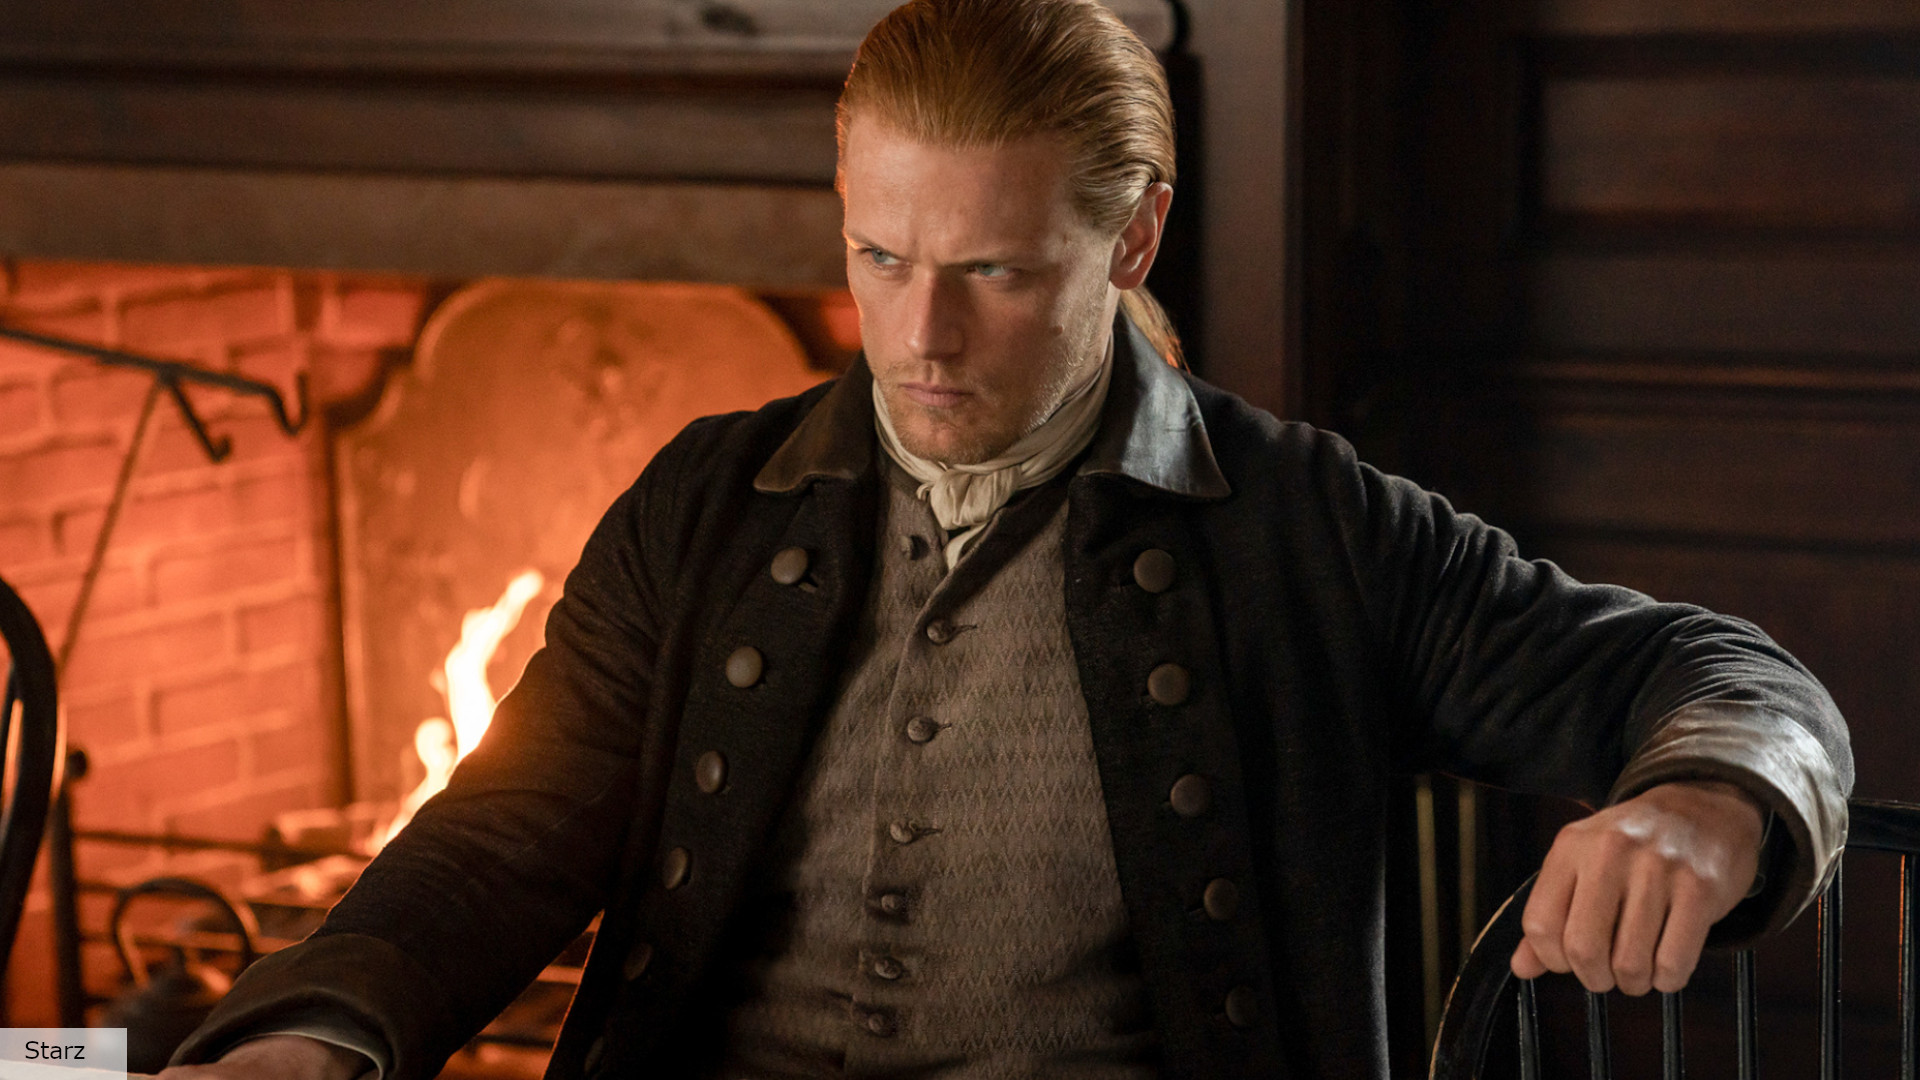 Who will be the next James Bond: Sam Heughan in Outlander